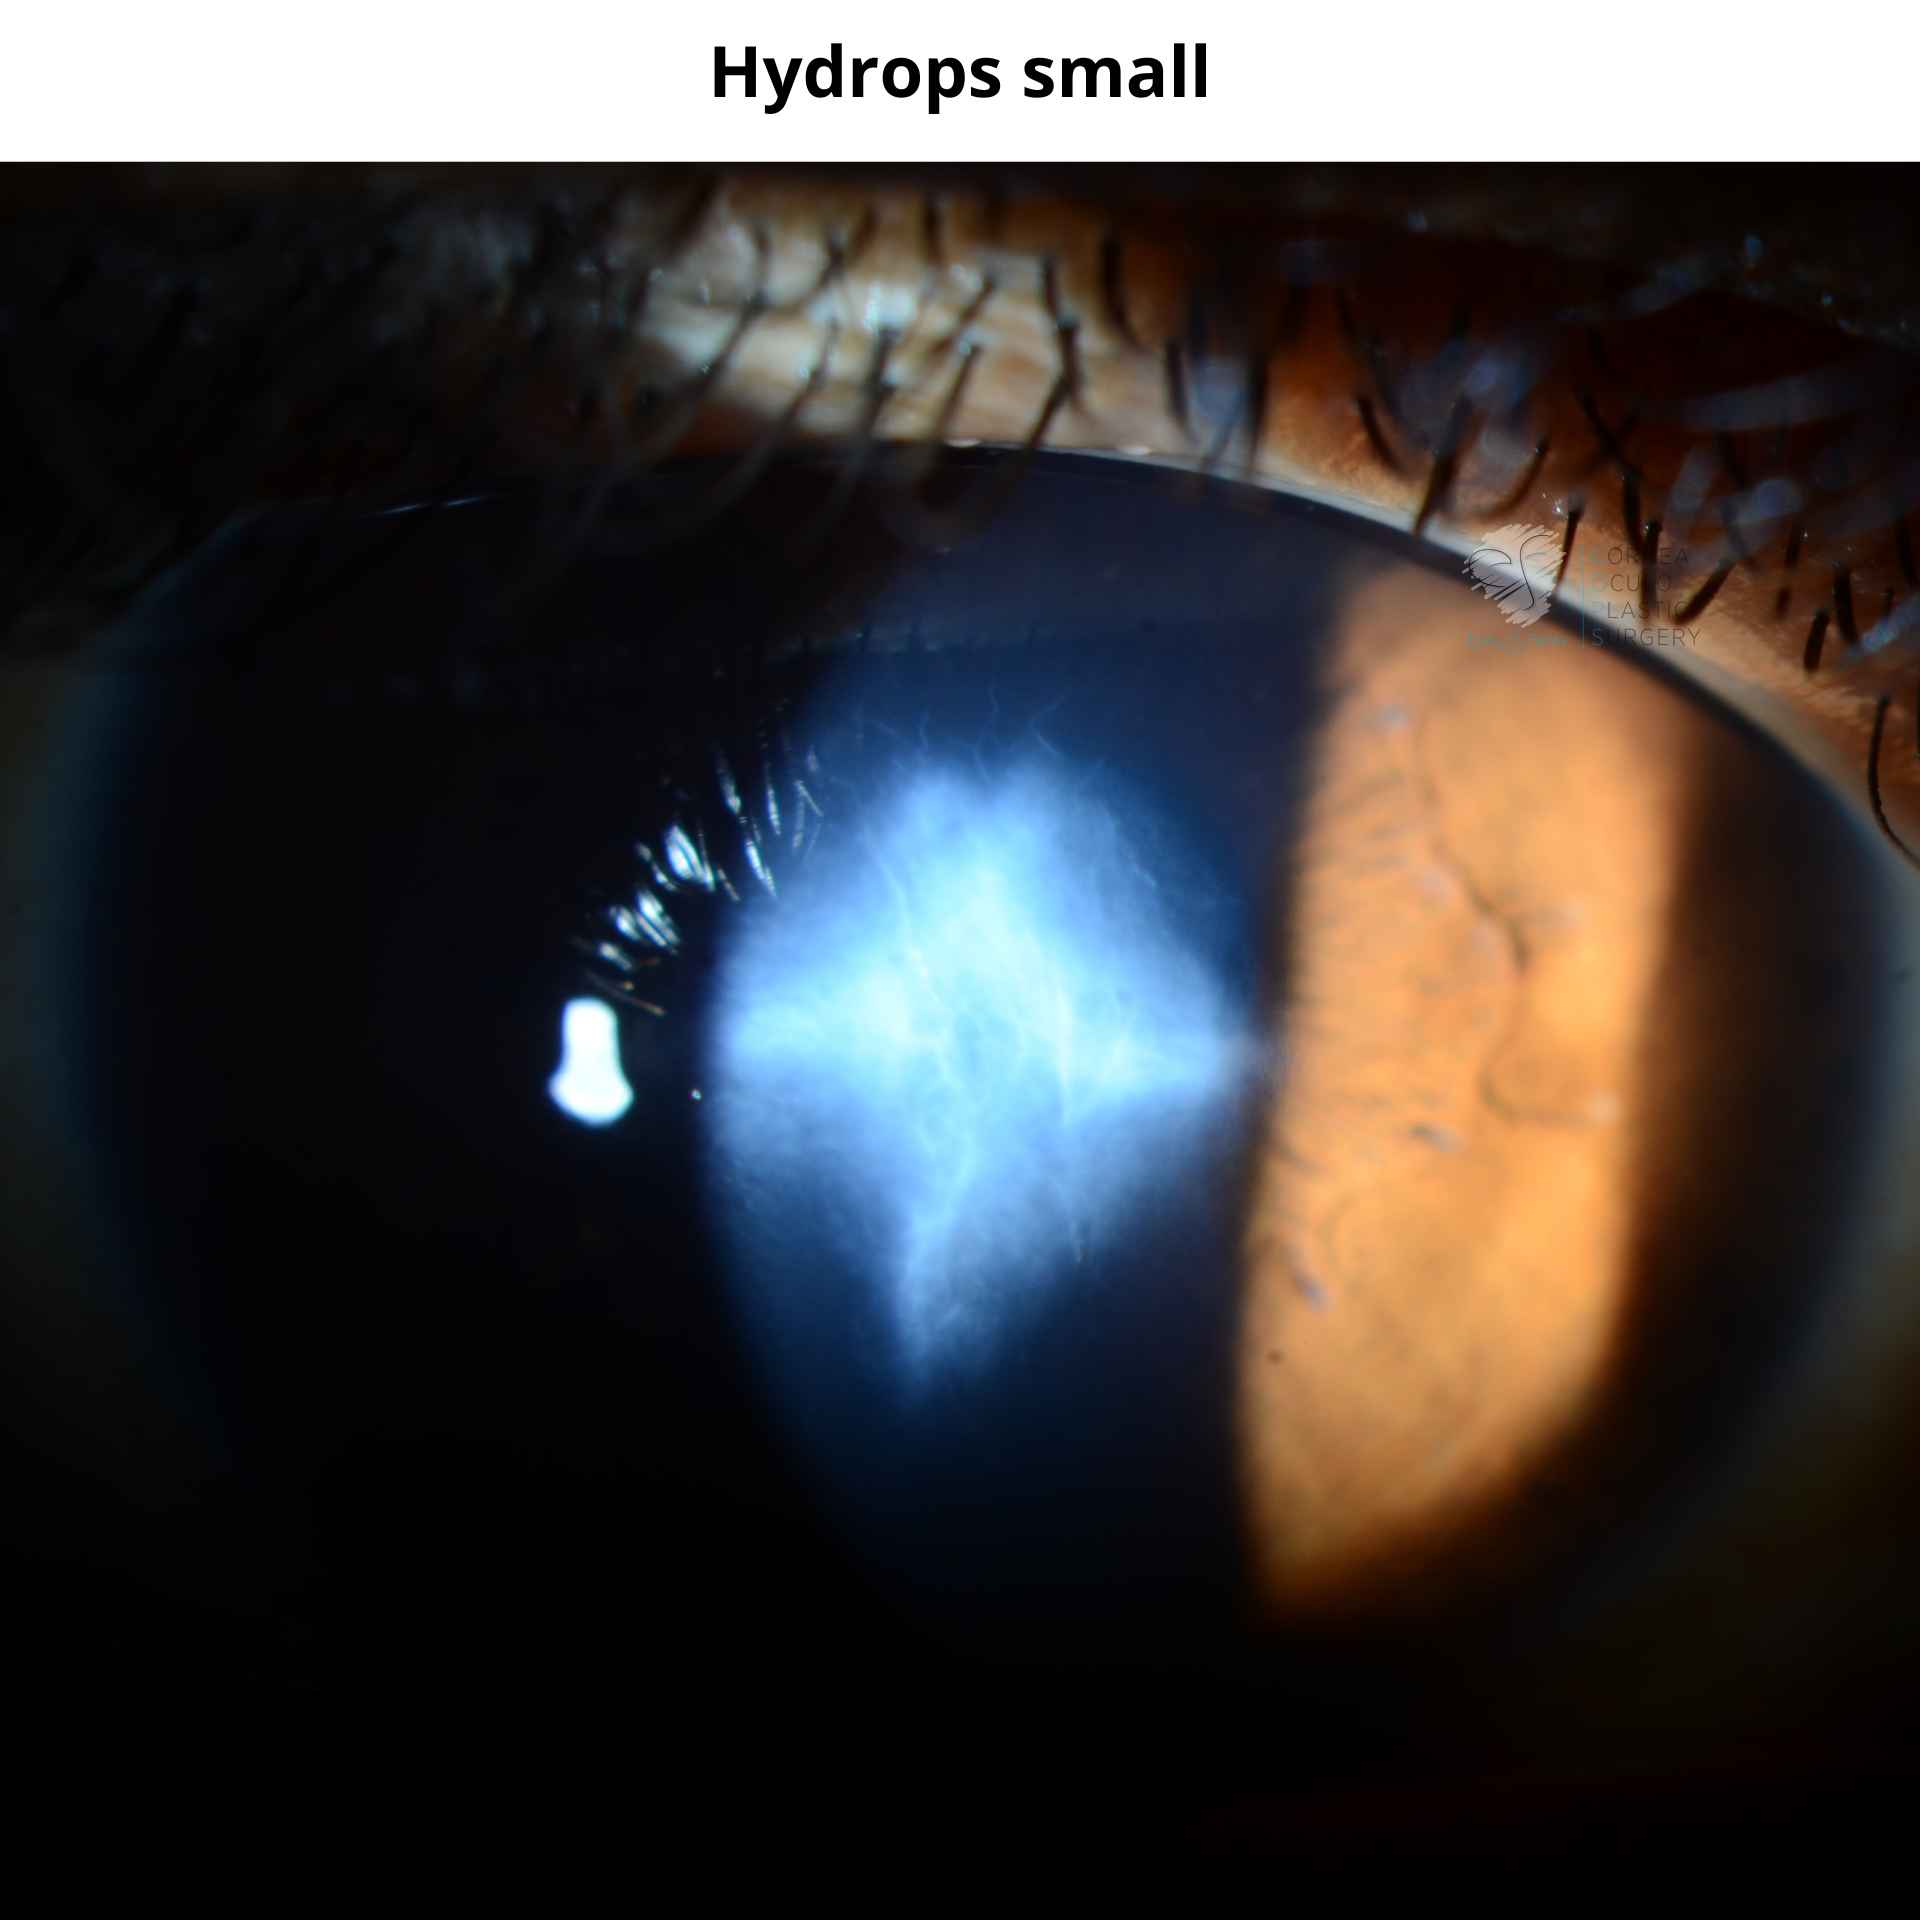 Small Hydrops as seen via a slit lamp.